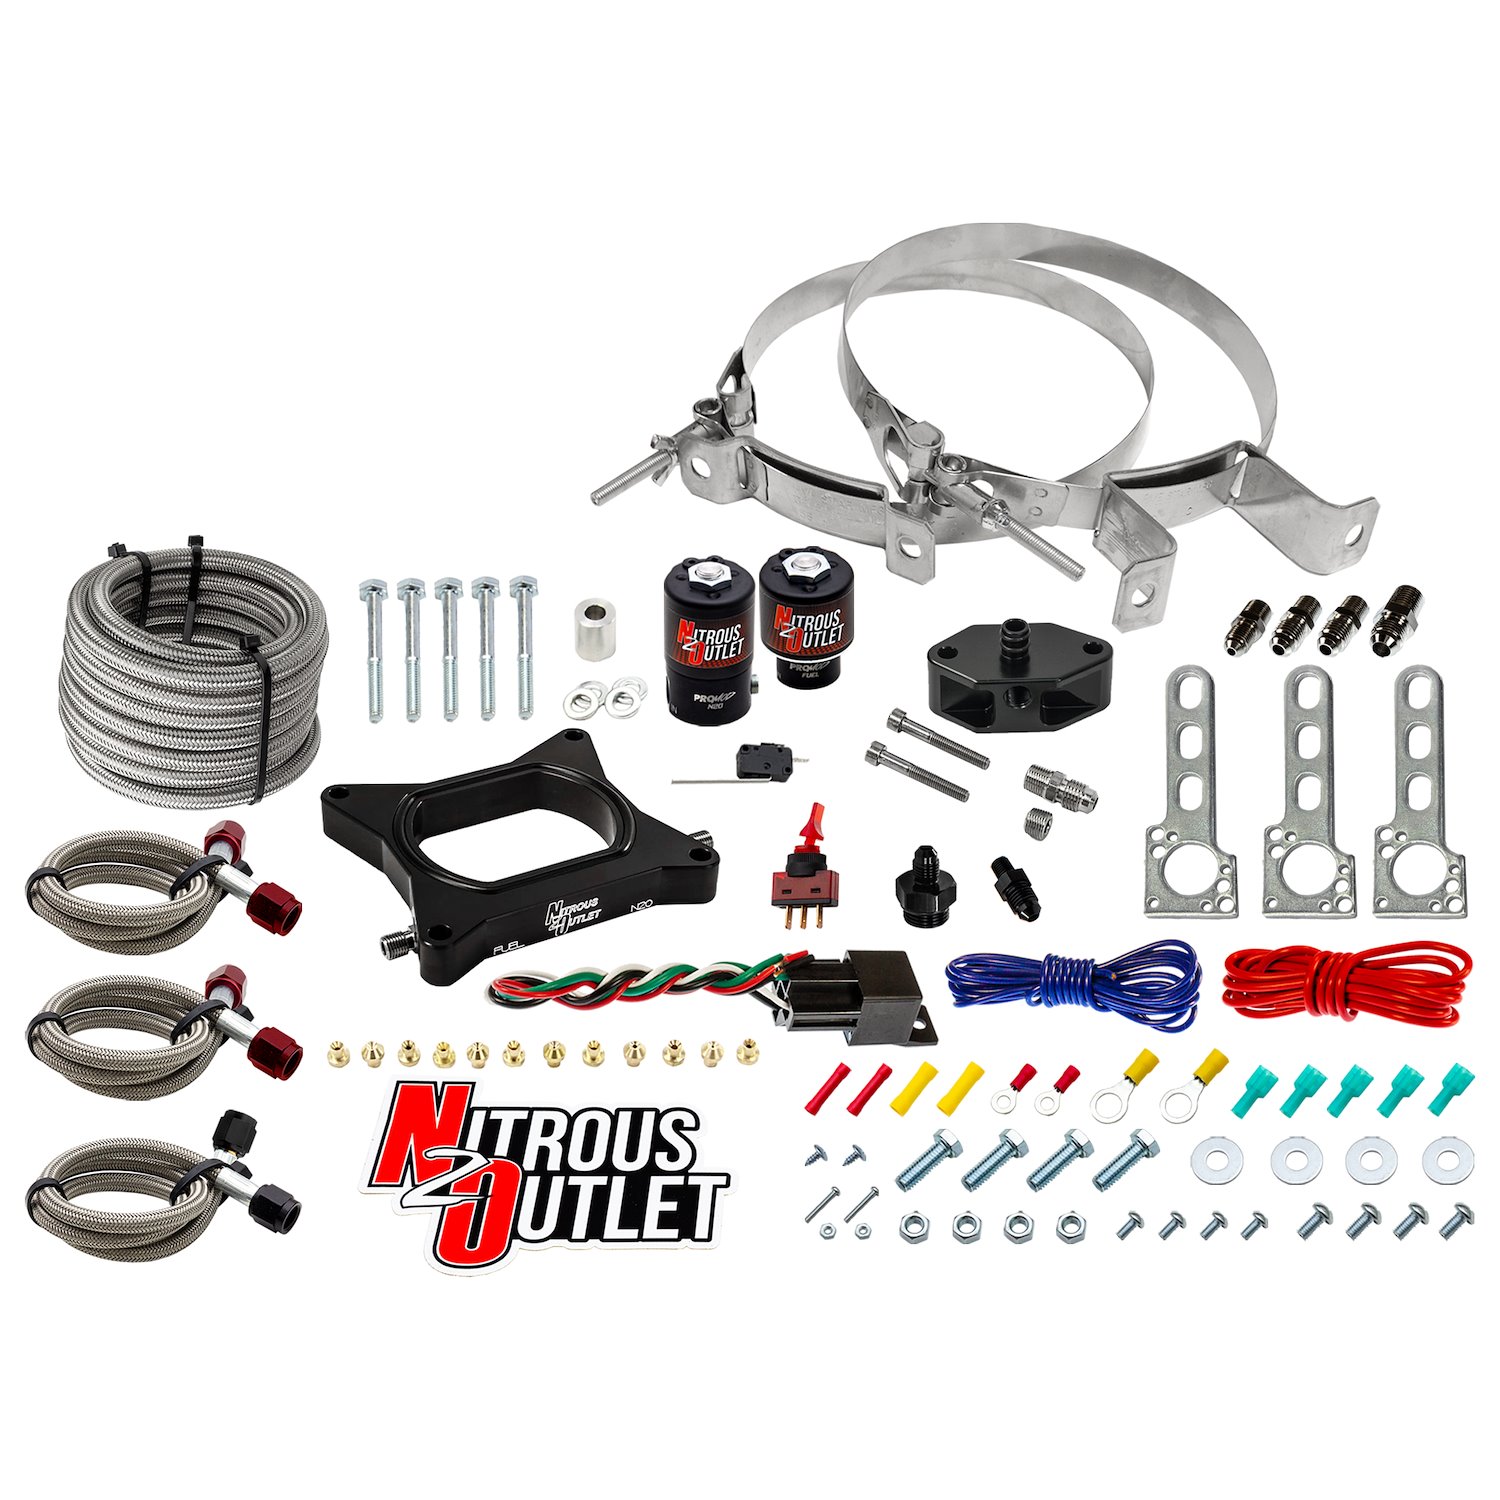 00-10140-00 Ford 1996-2004 4.6L 2V Mustang Plate System, Gas/E85, 5-55psi, 50-200HP, No Bottle